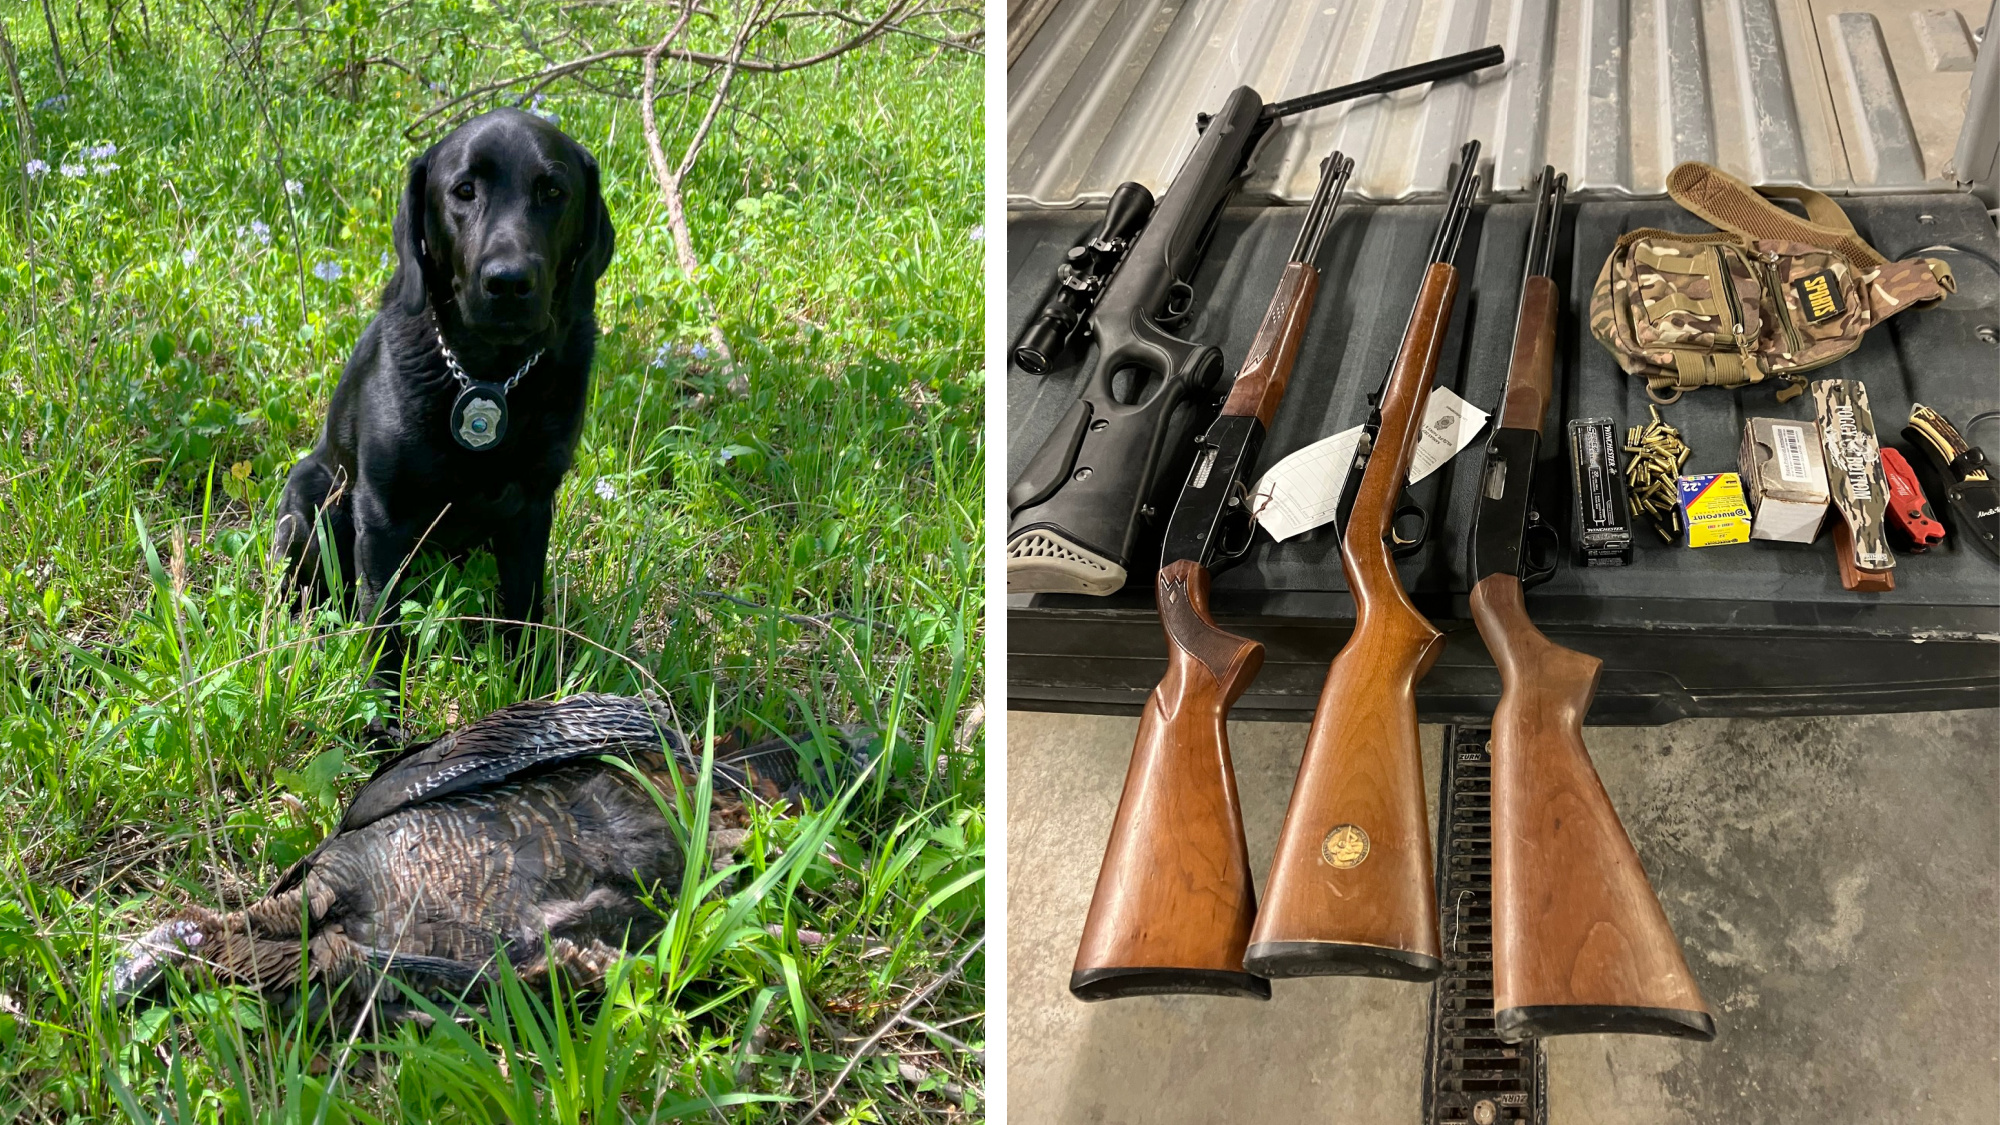 A K9 named Indy with a poached turkey, and a pile of hunting gear.